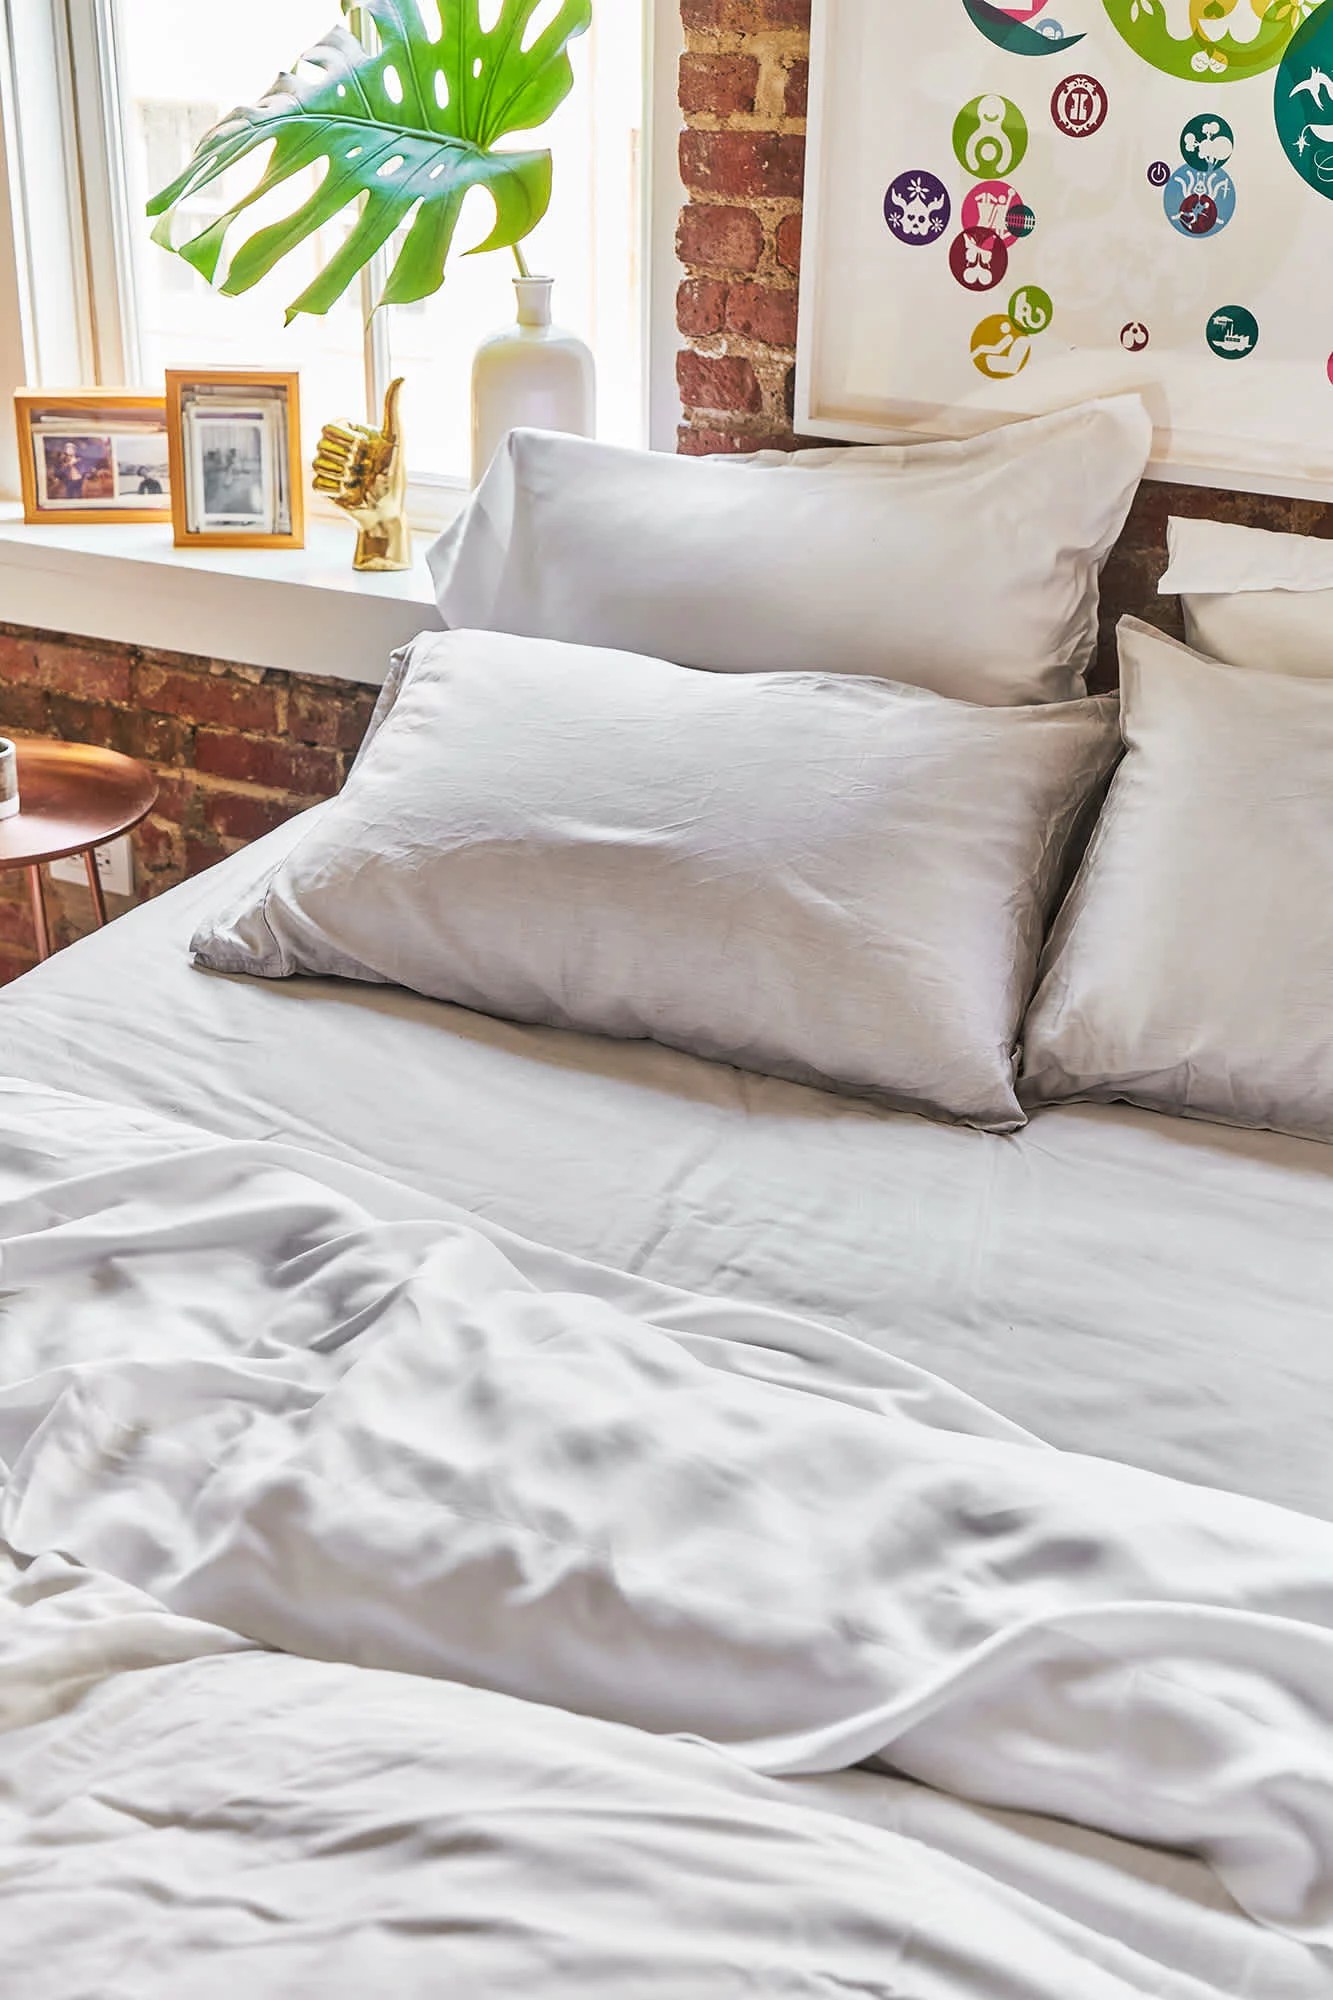 Are There Eco-friendly Bedding Options?